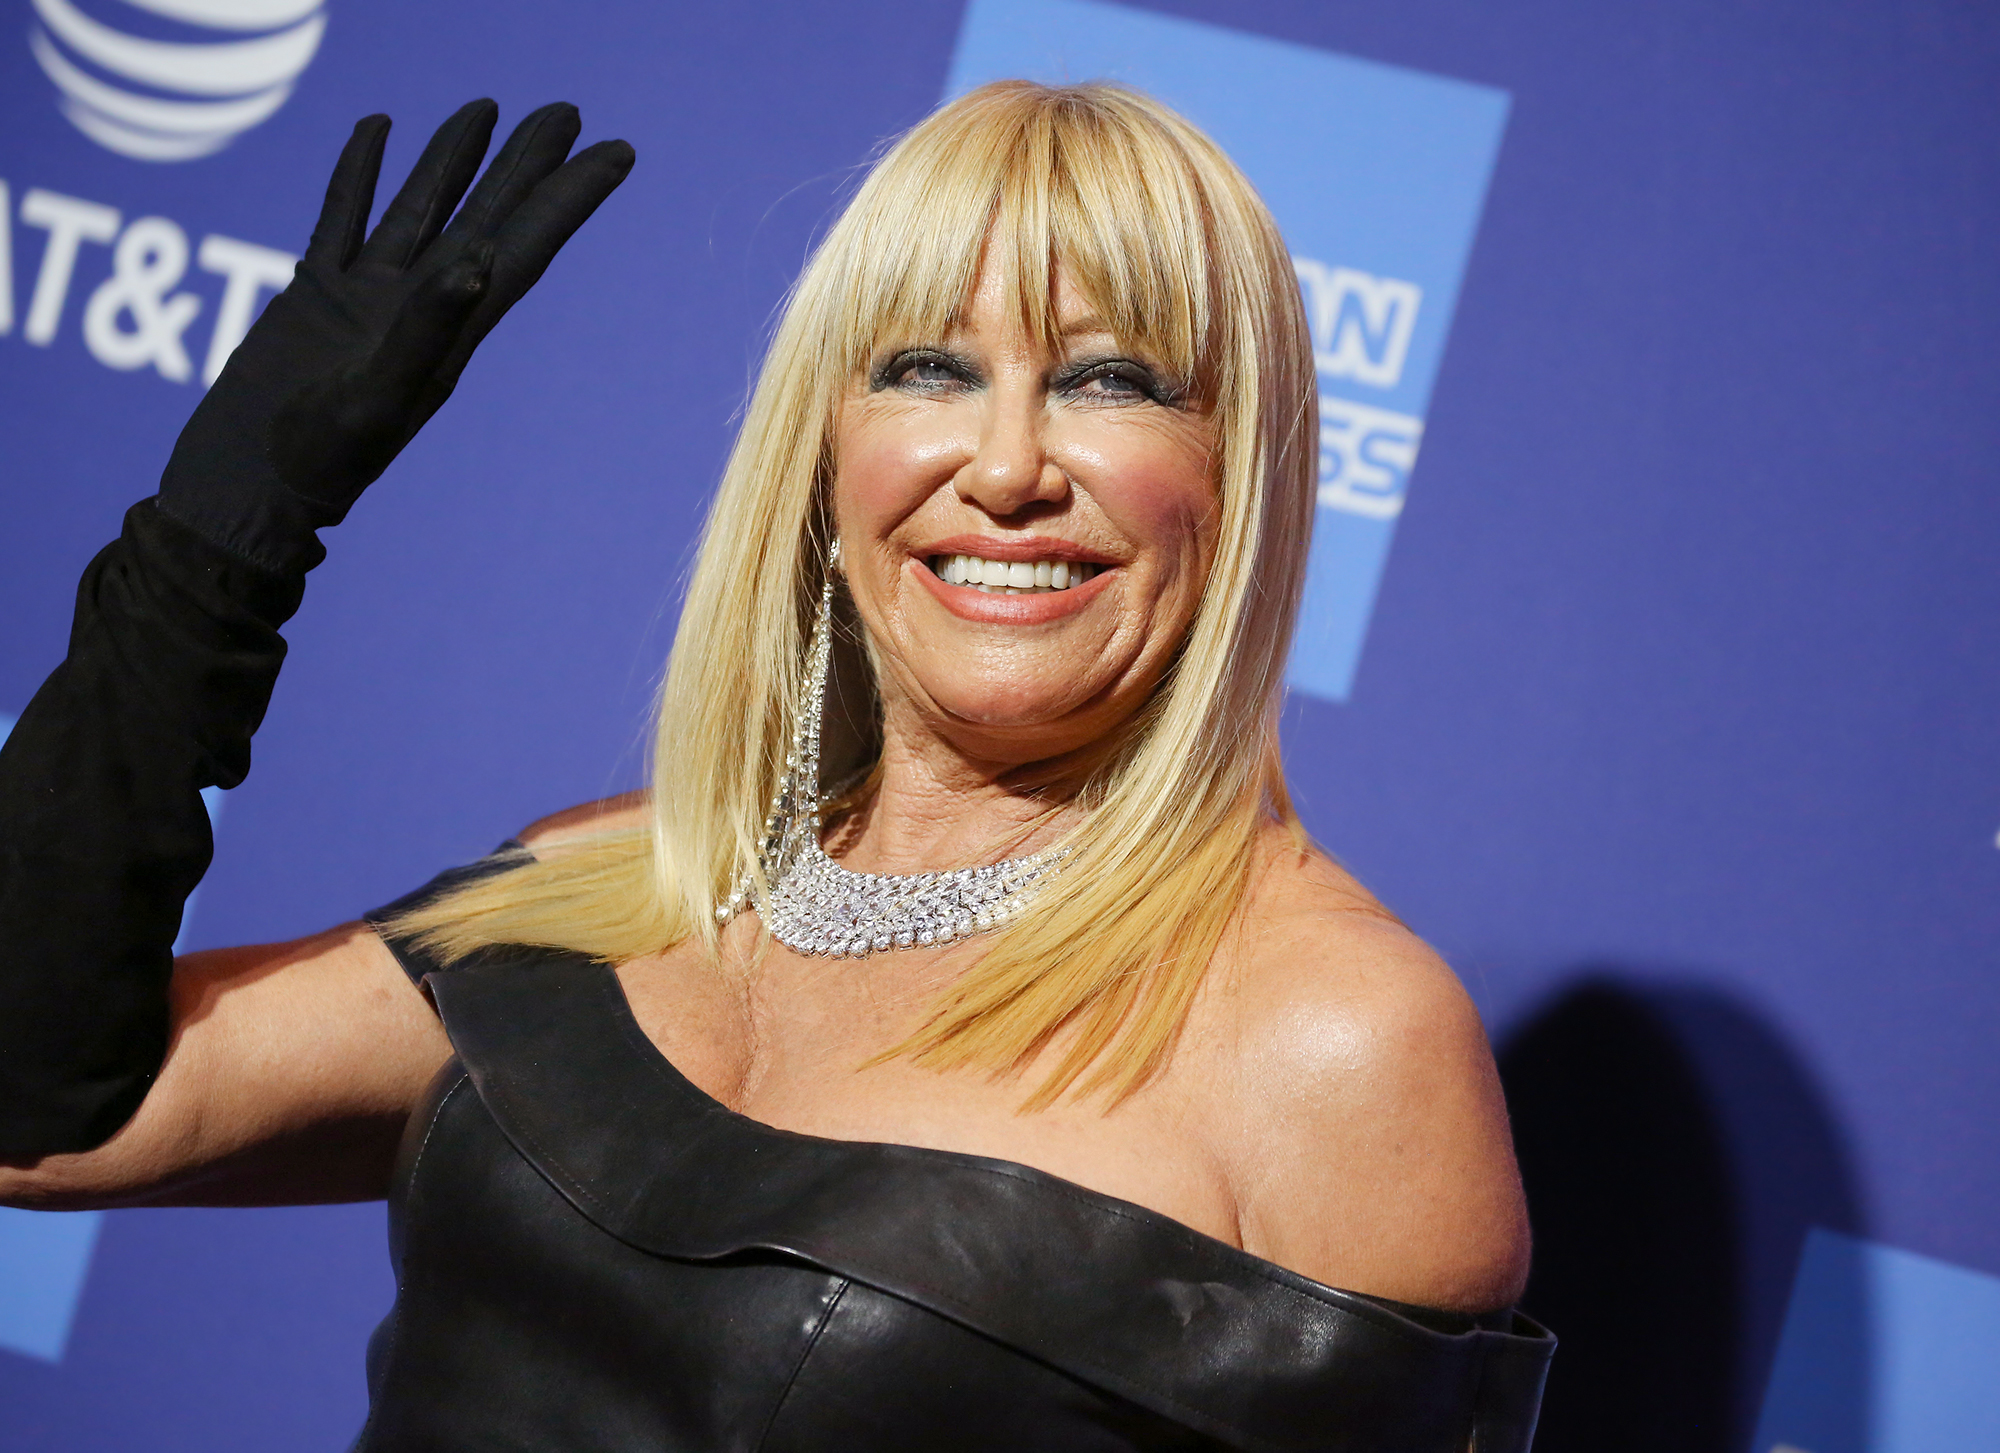 Suzanne Somers’ Husband Says She's Taking a Step Back From Her Career After Another Cancer Battle